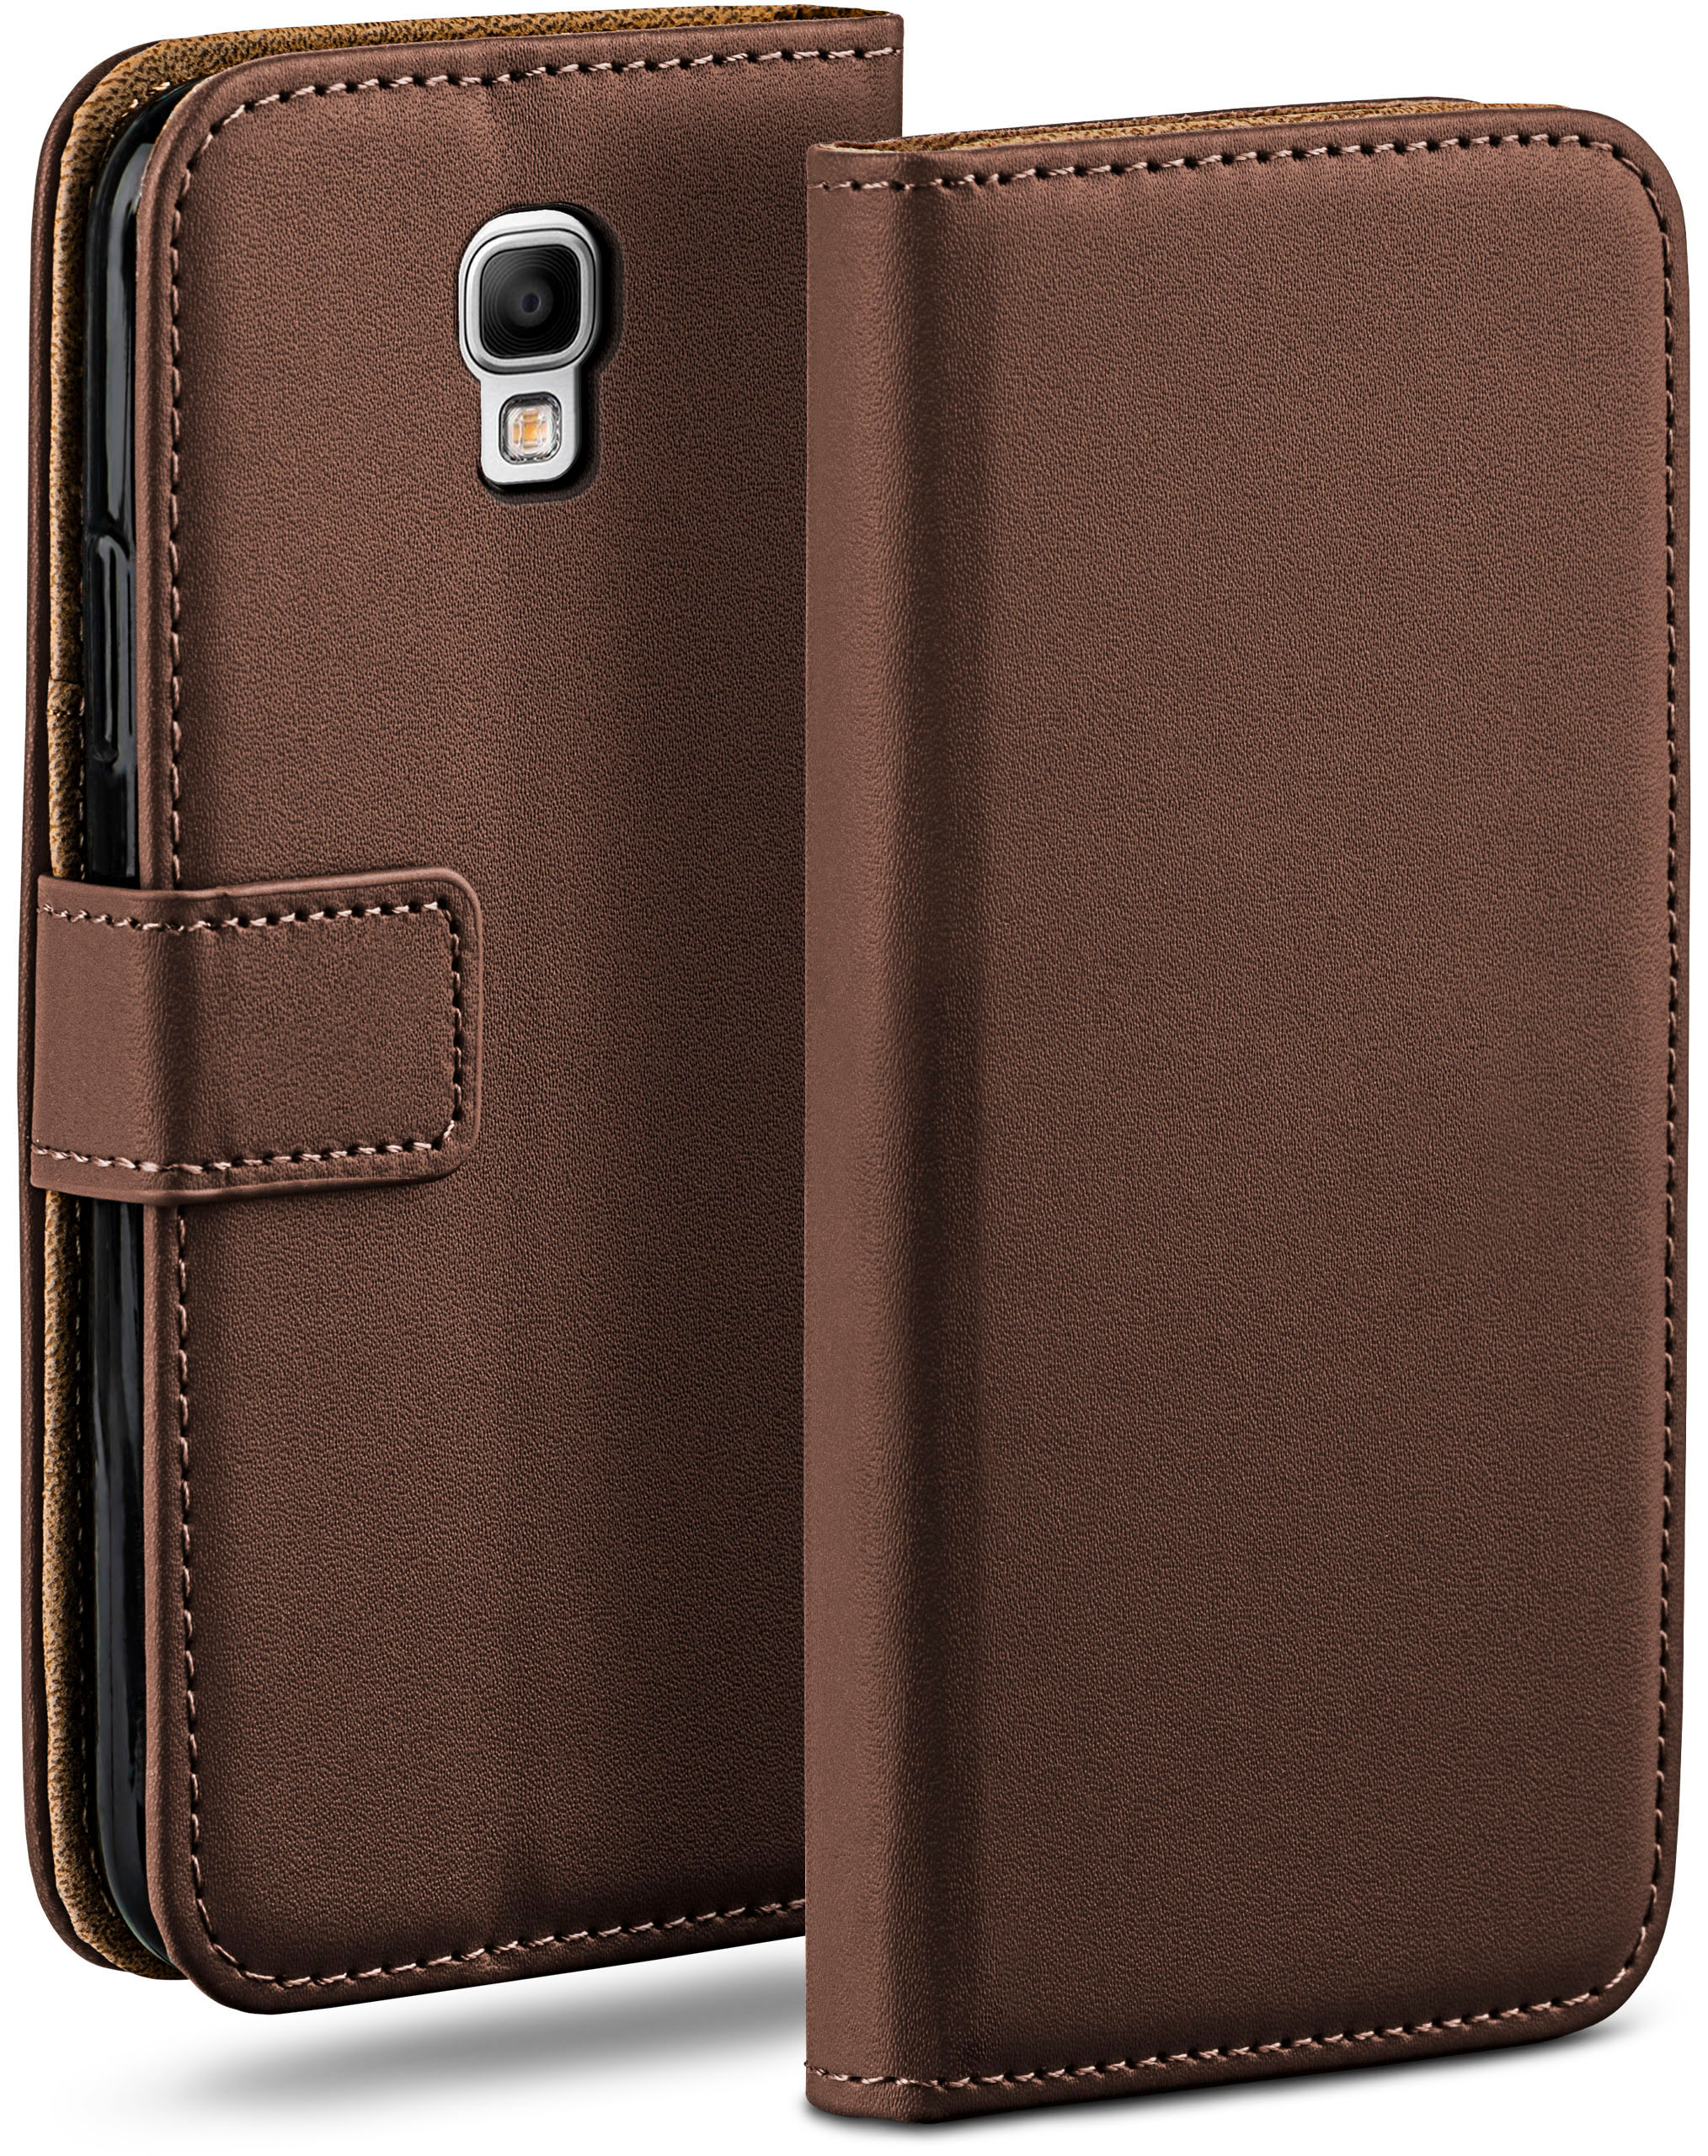 Case, Neo, Galaxy Samsung, Oxide-Brown Bookcover, MOEX Note Book 3